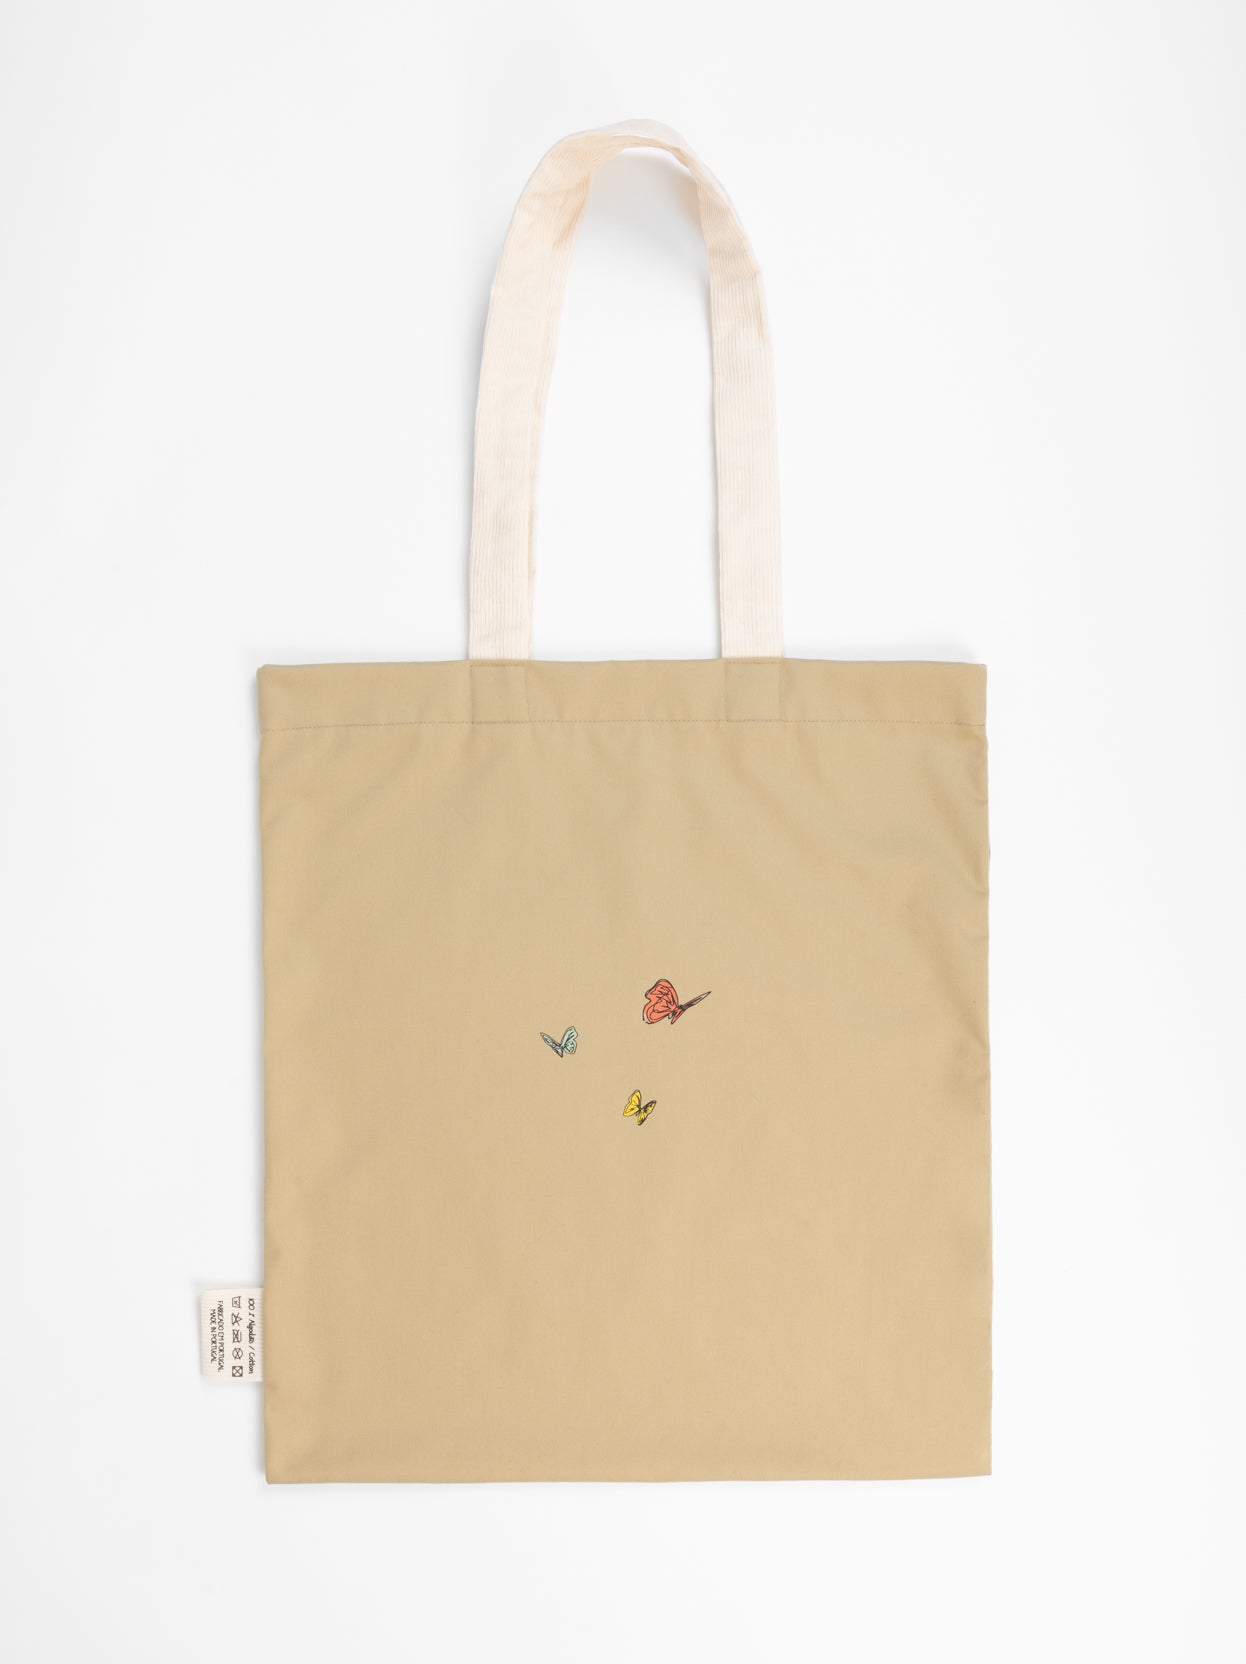 Butterfly Illustrated Tote Bag